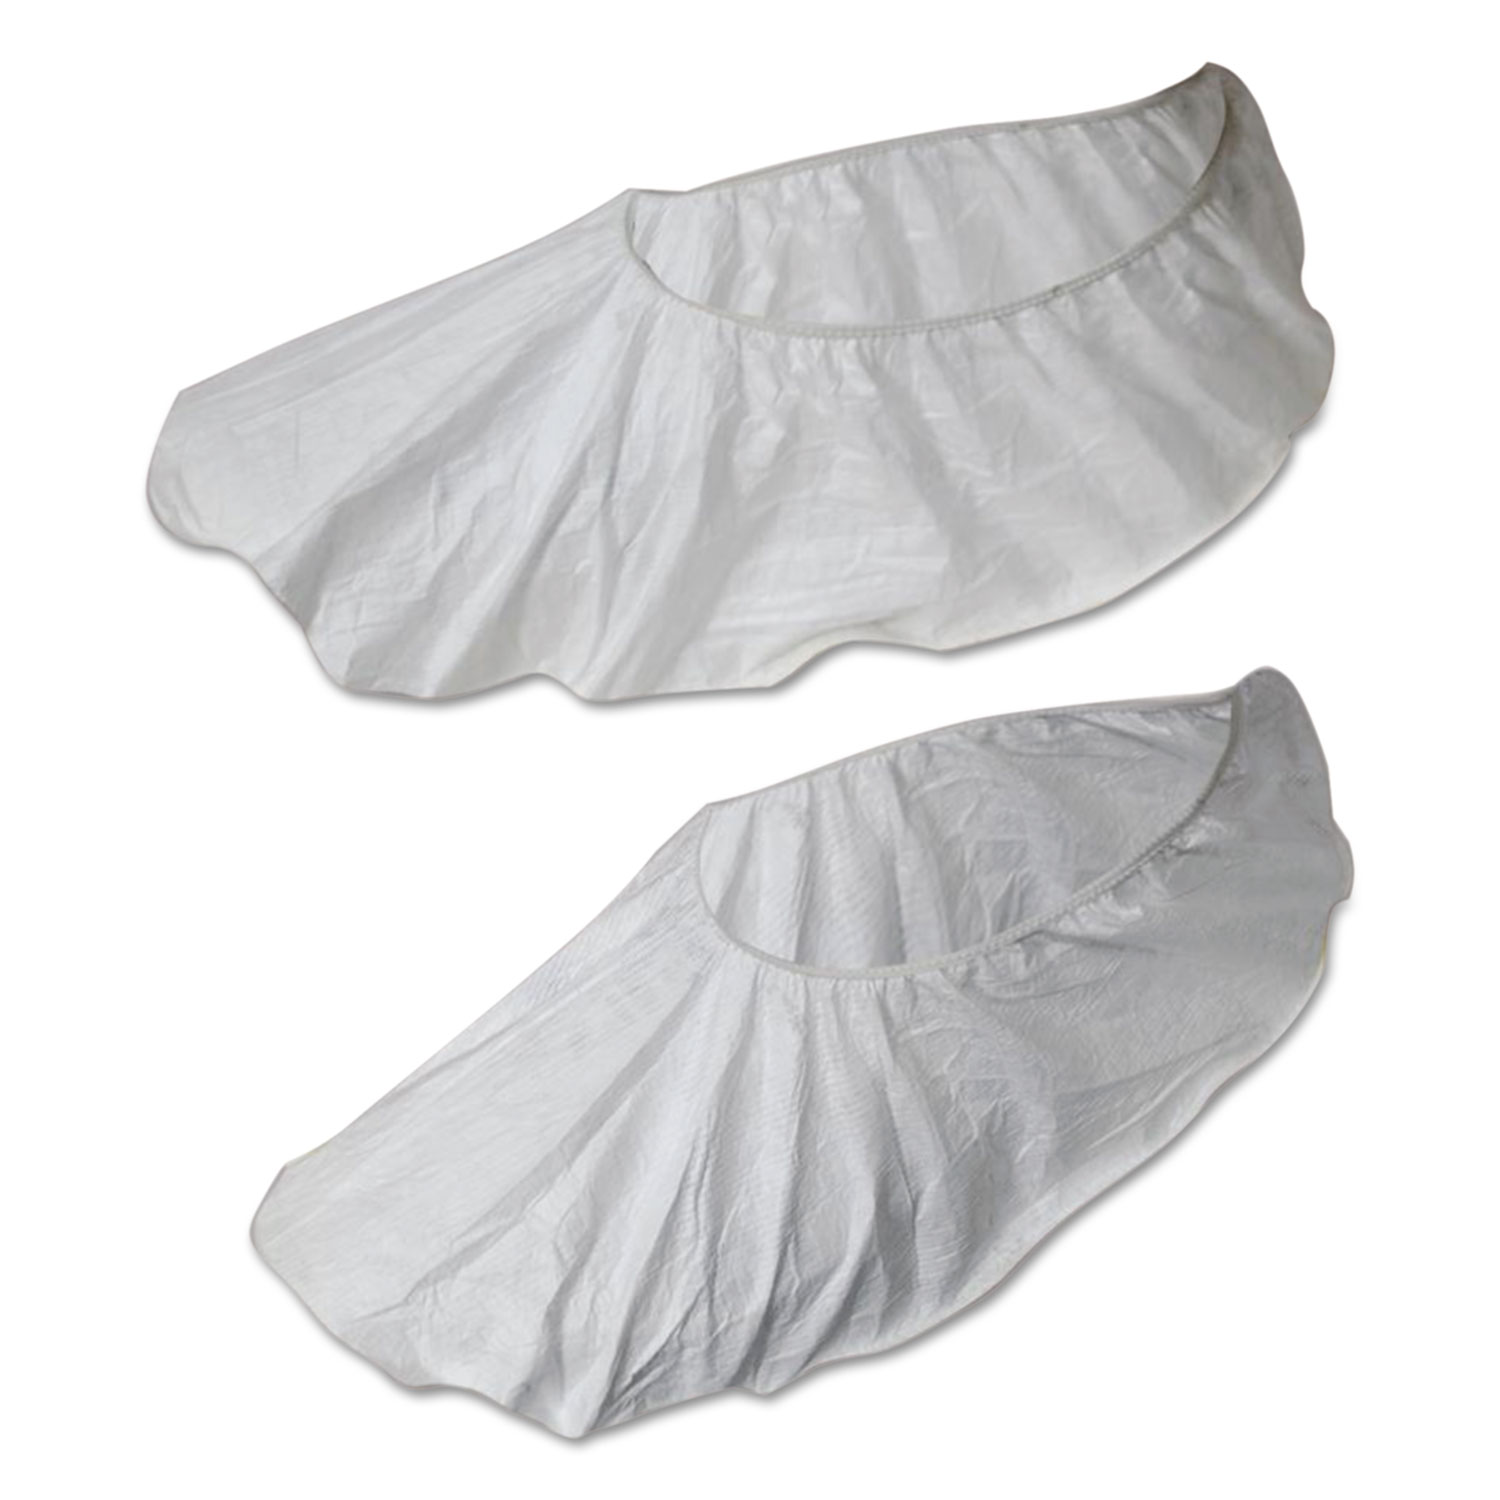 Disposable Shoe Covers, White, Large, 50 Pair/Pack